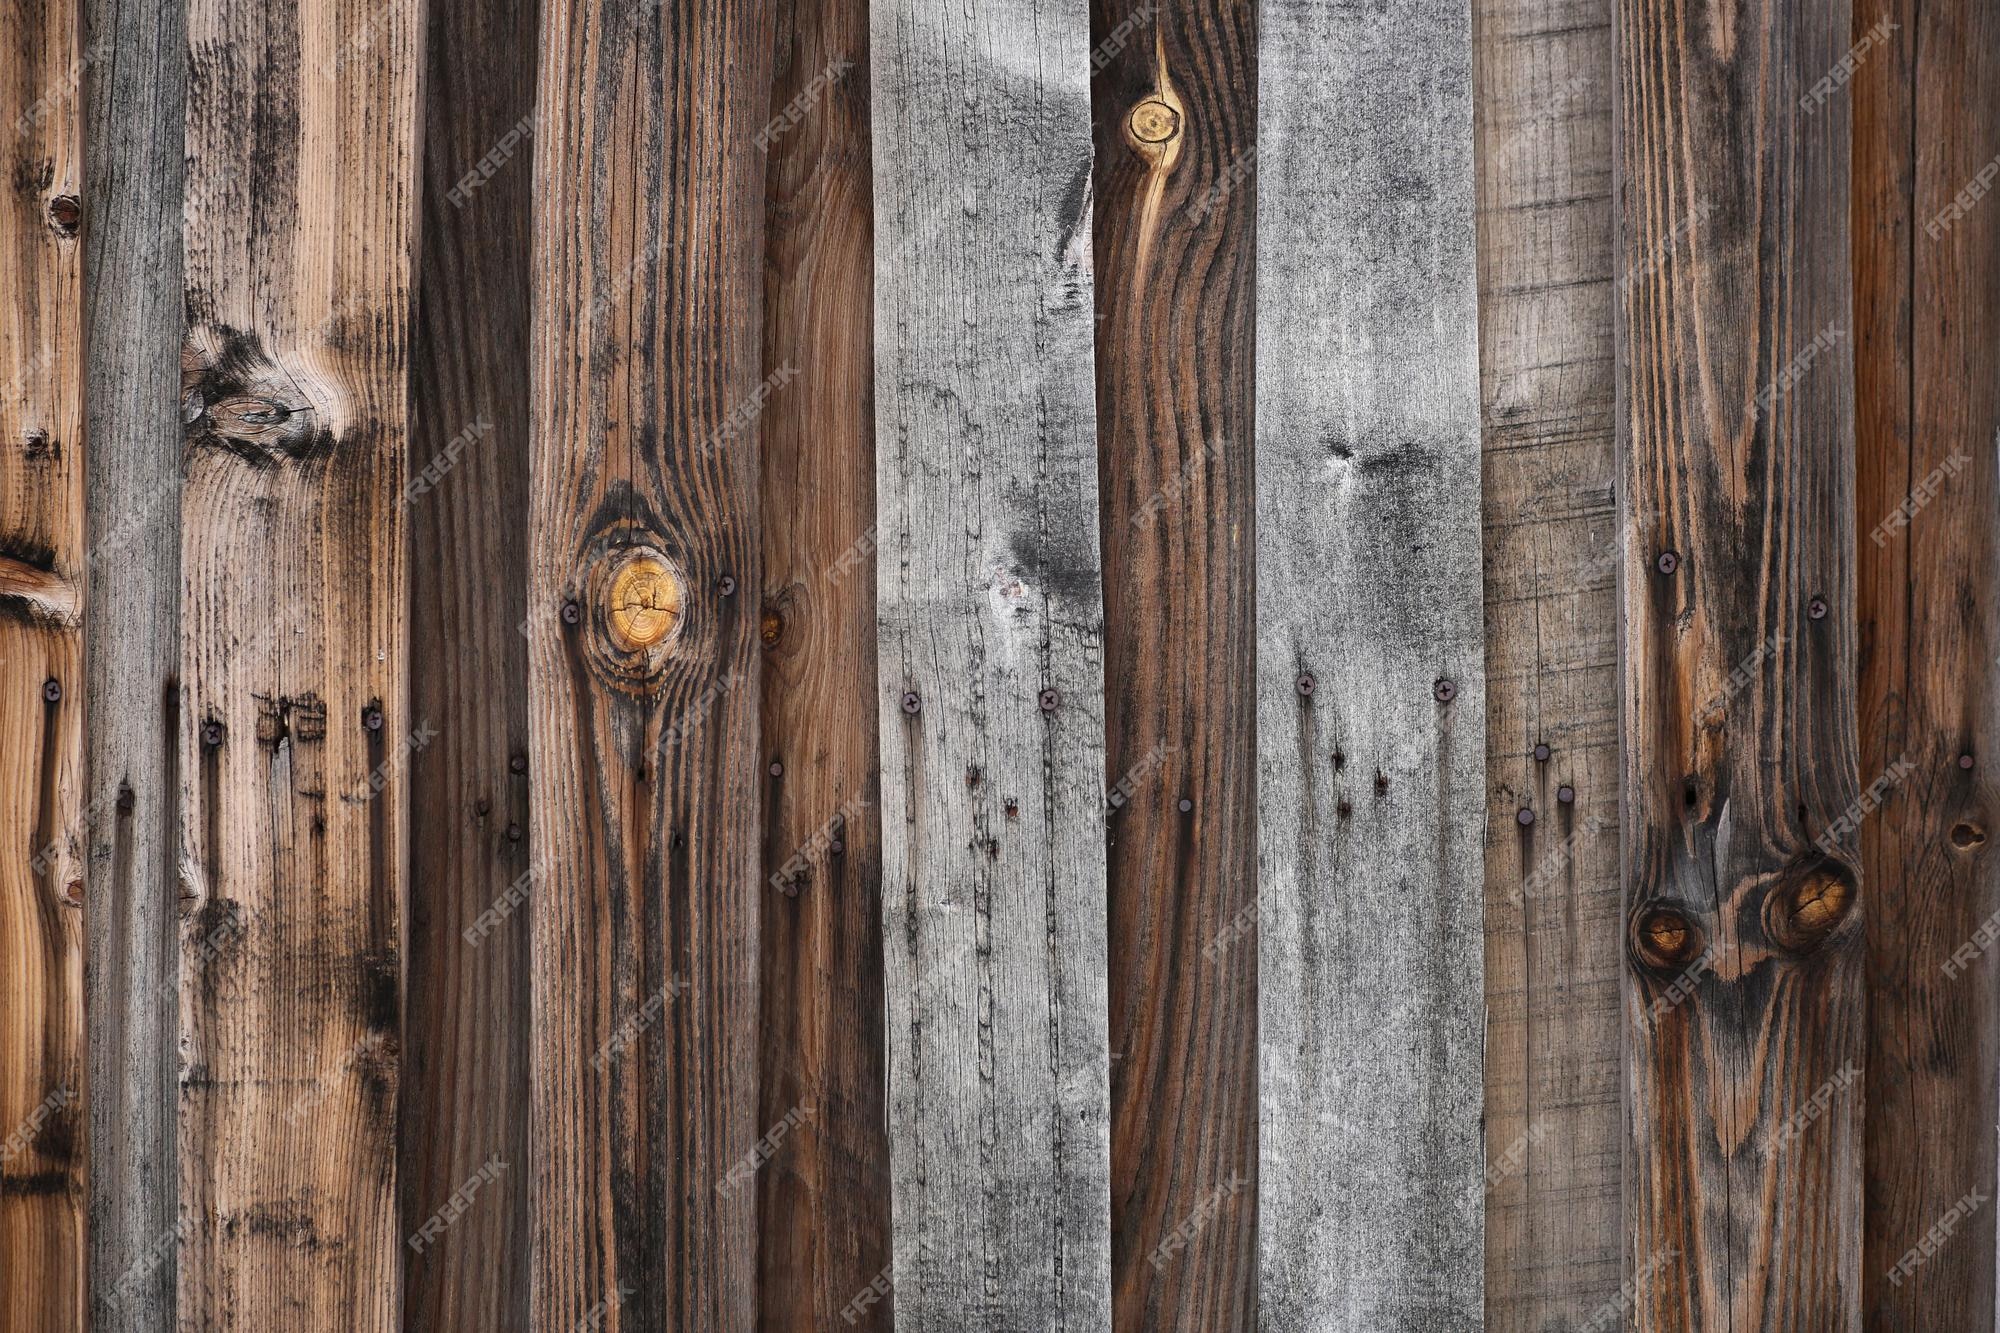 Premium Photo | Wood texture wallpaper background, vintage darkened fence.  gray and brown boards with rusty nails. high quality photo